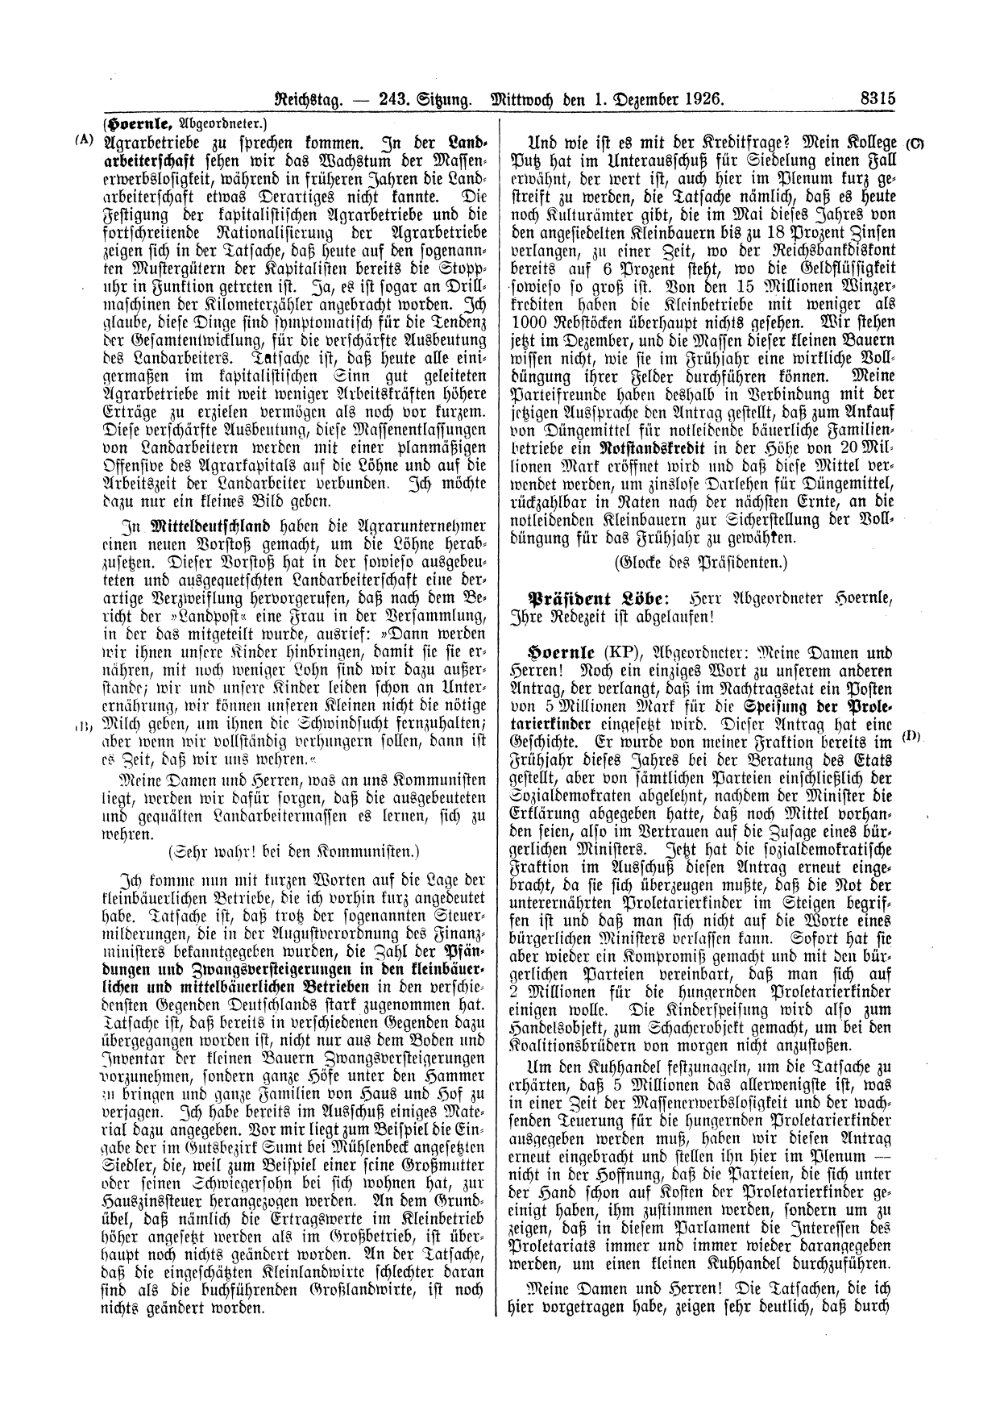 Scan of page 8315